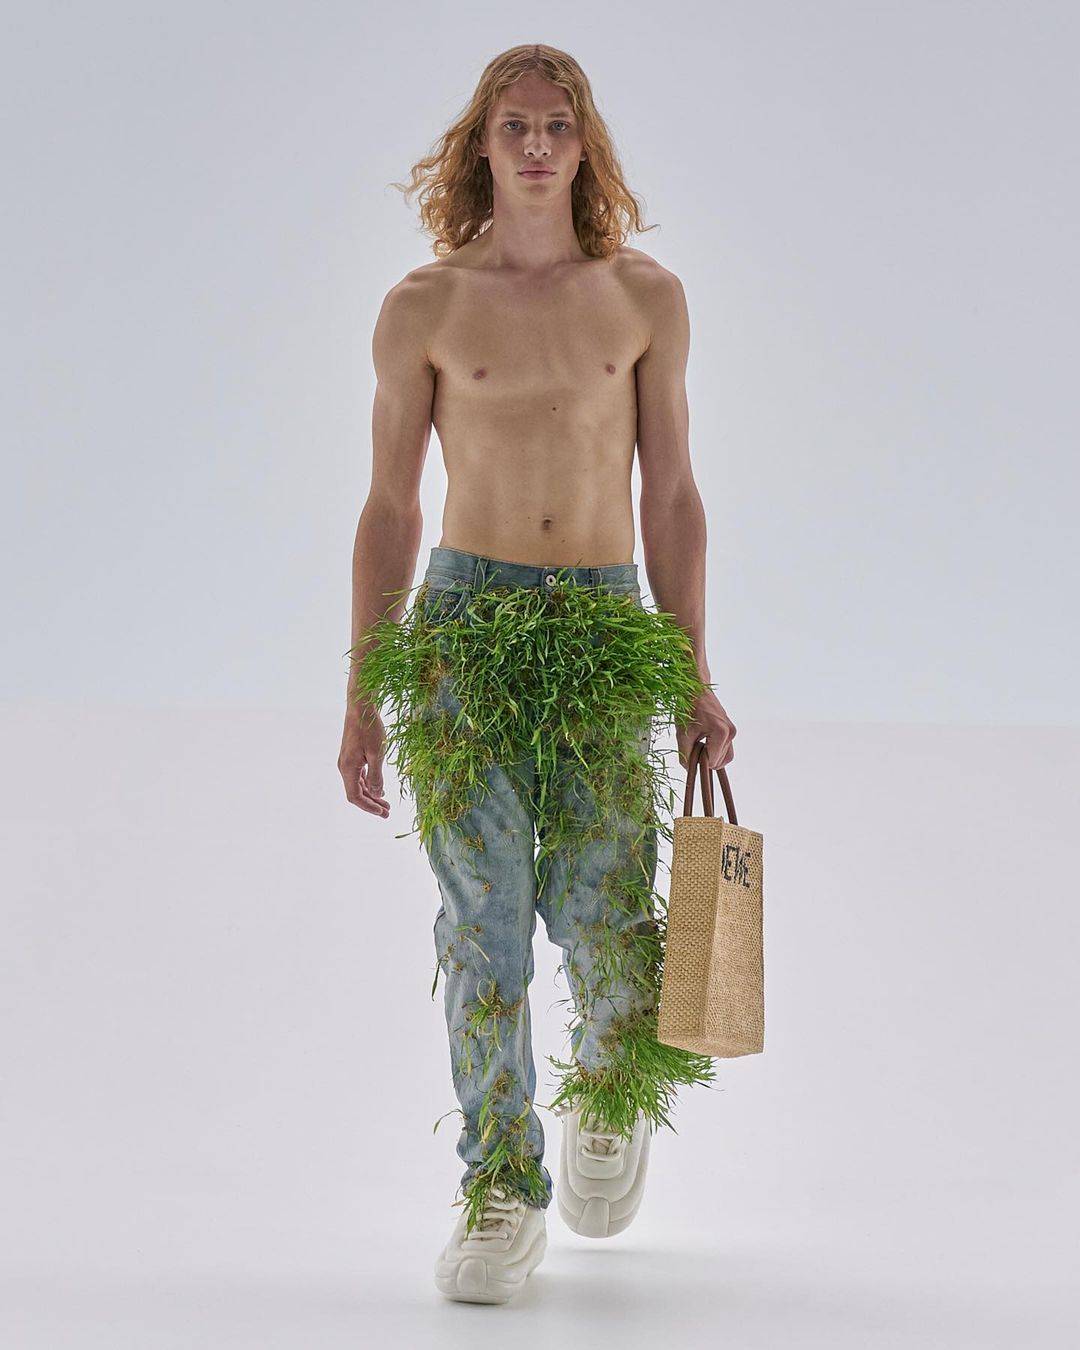 Jonathan Anderson, the creative director for Loewe, designed a collection that fuses technology and nature, showcasing garments that feature living plants